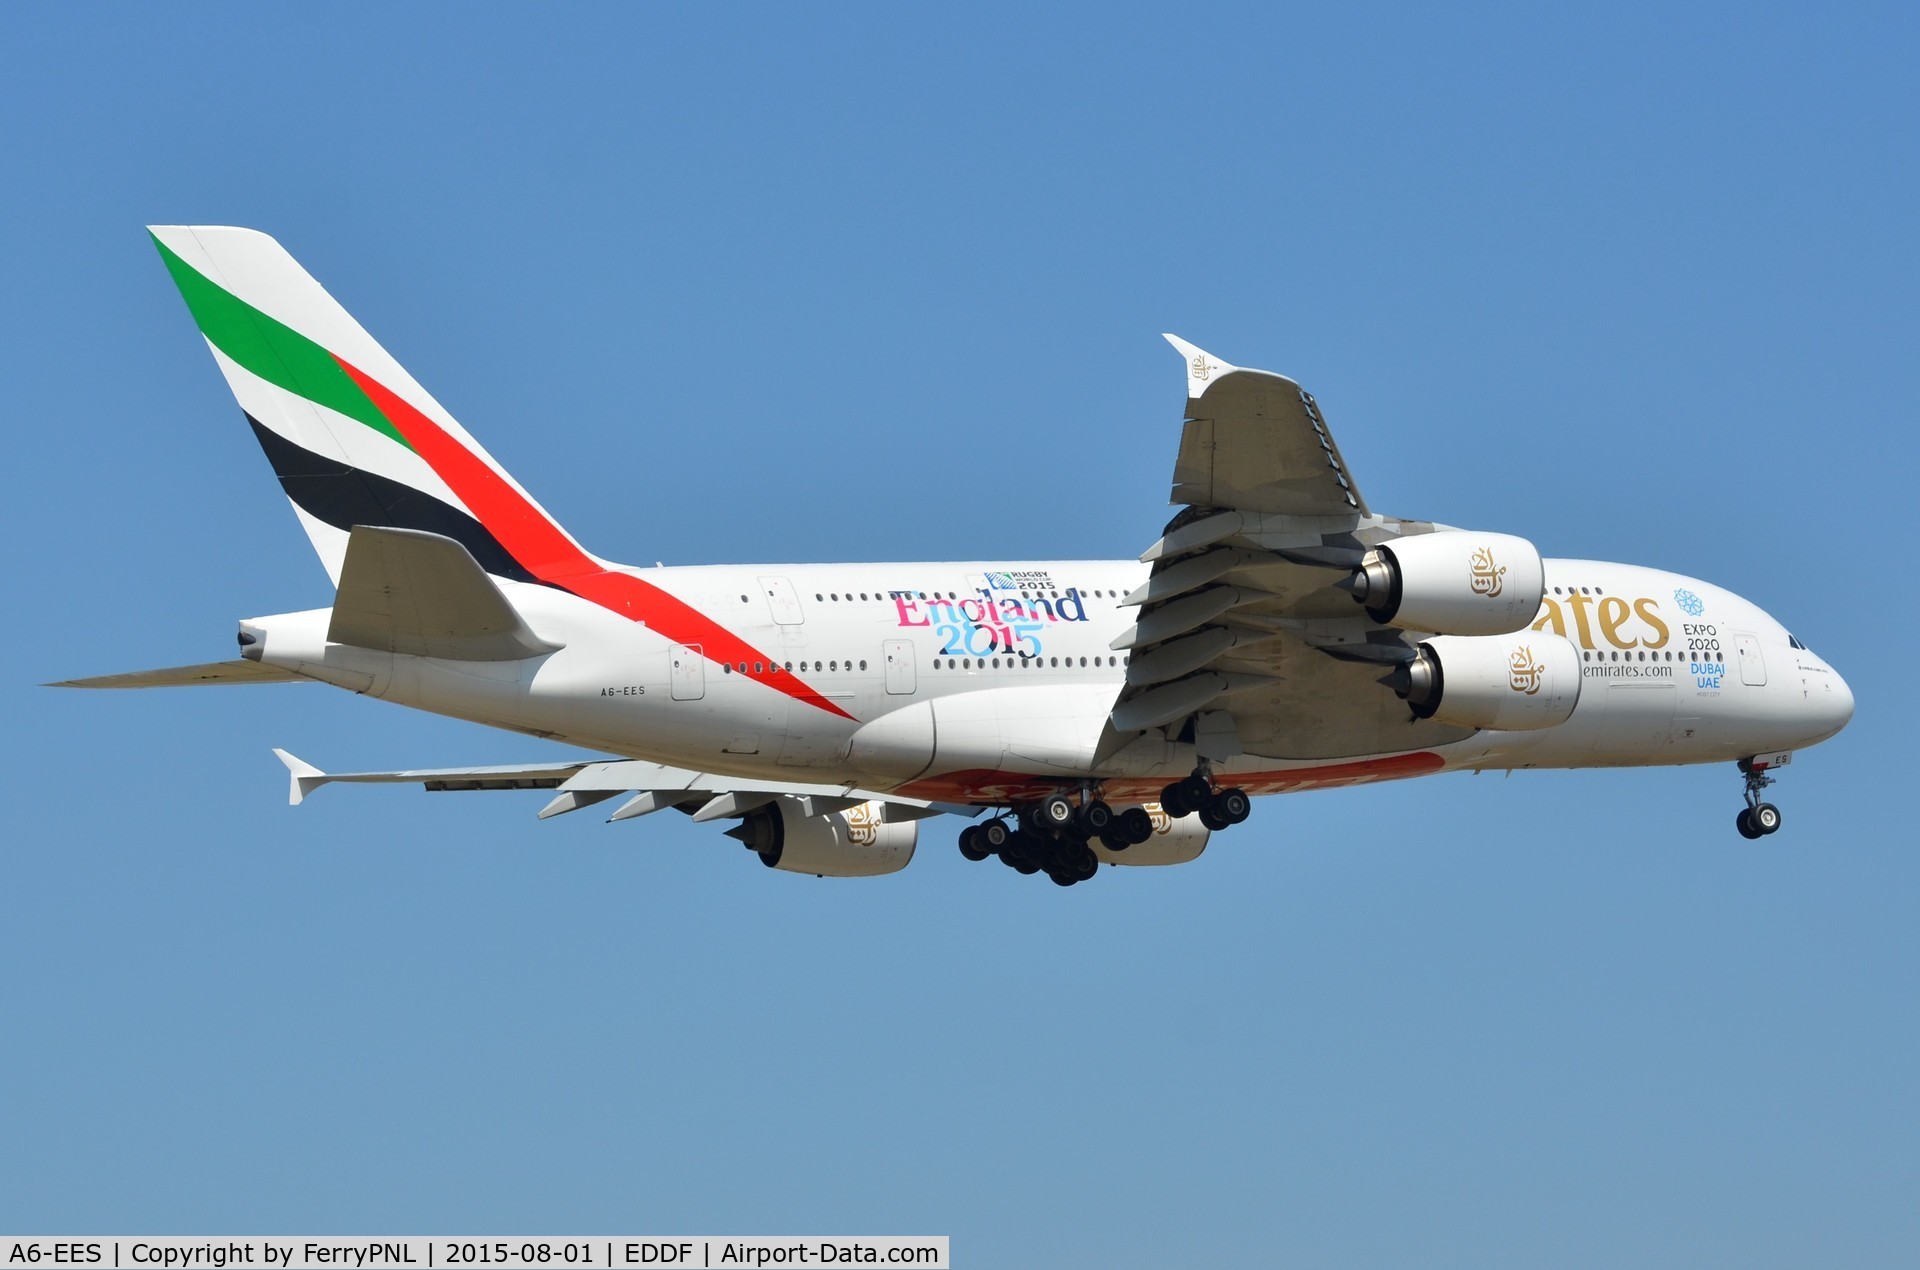 A6-EES, 2013 Airbus A380-861 C/N 140, Emirates A388 landing in FRA